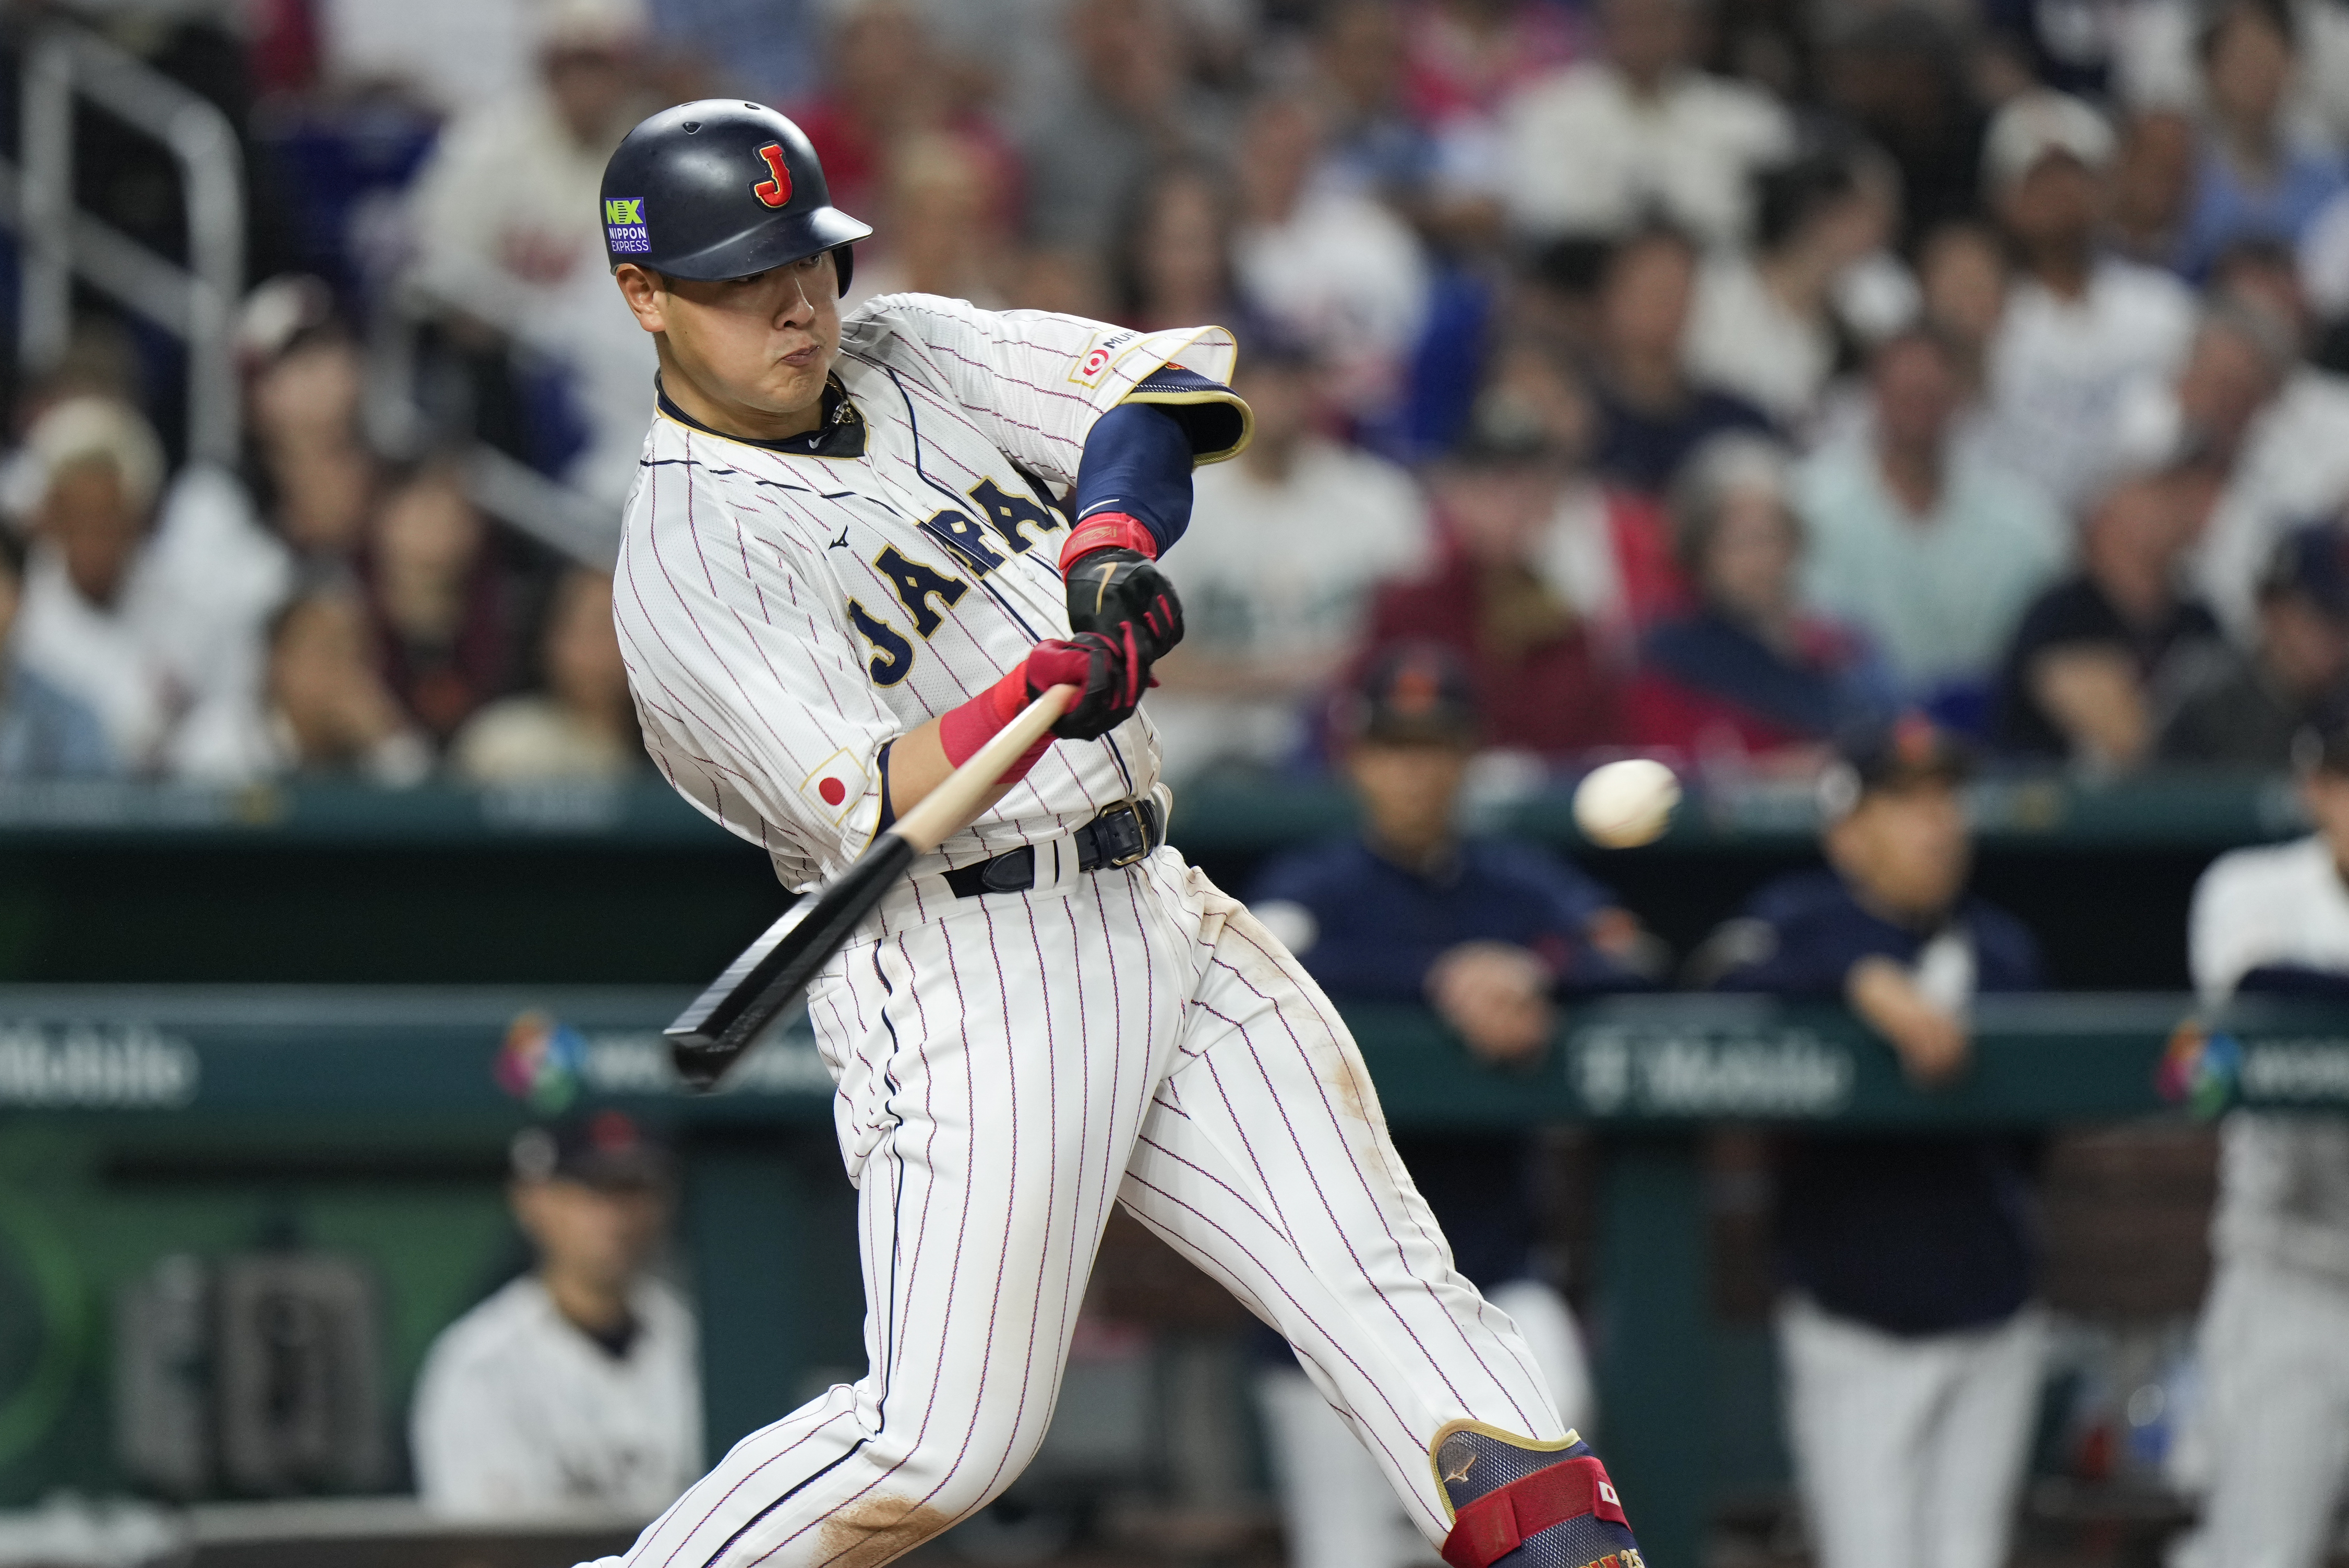 Kazuma Okamoto homers for Japan against the United States in the final of the World Baseball Classic, Tuesday, March 21, 2023, in Miami.  (AP Photo/Wilfredo Lee)